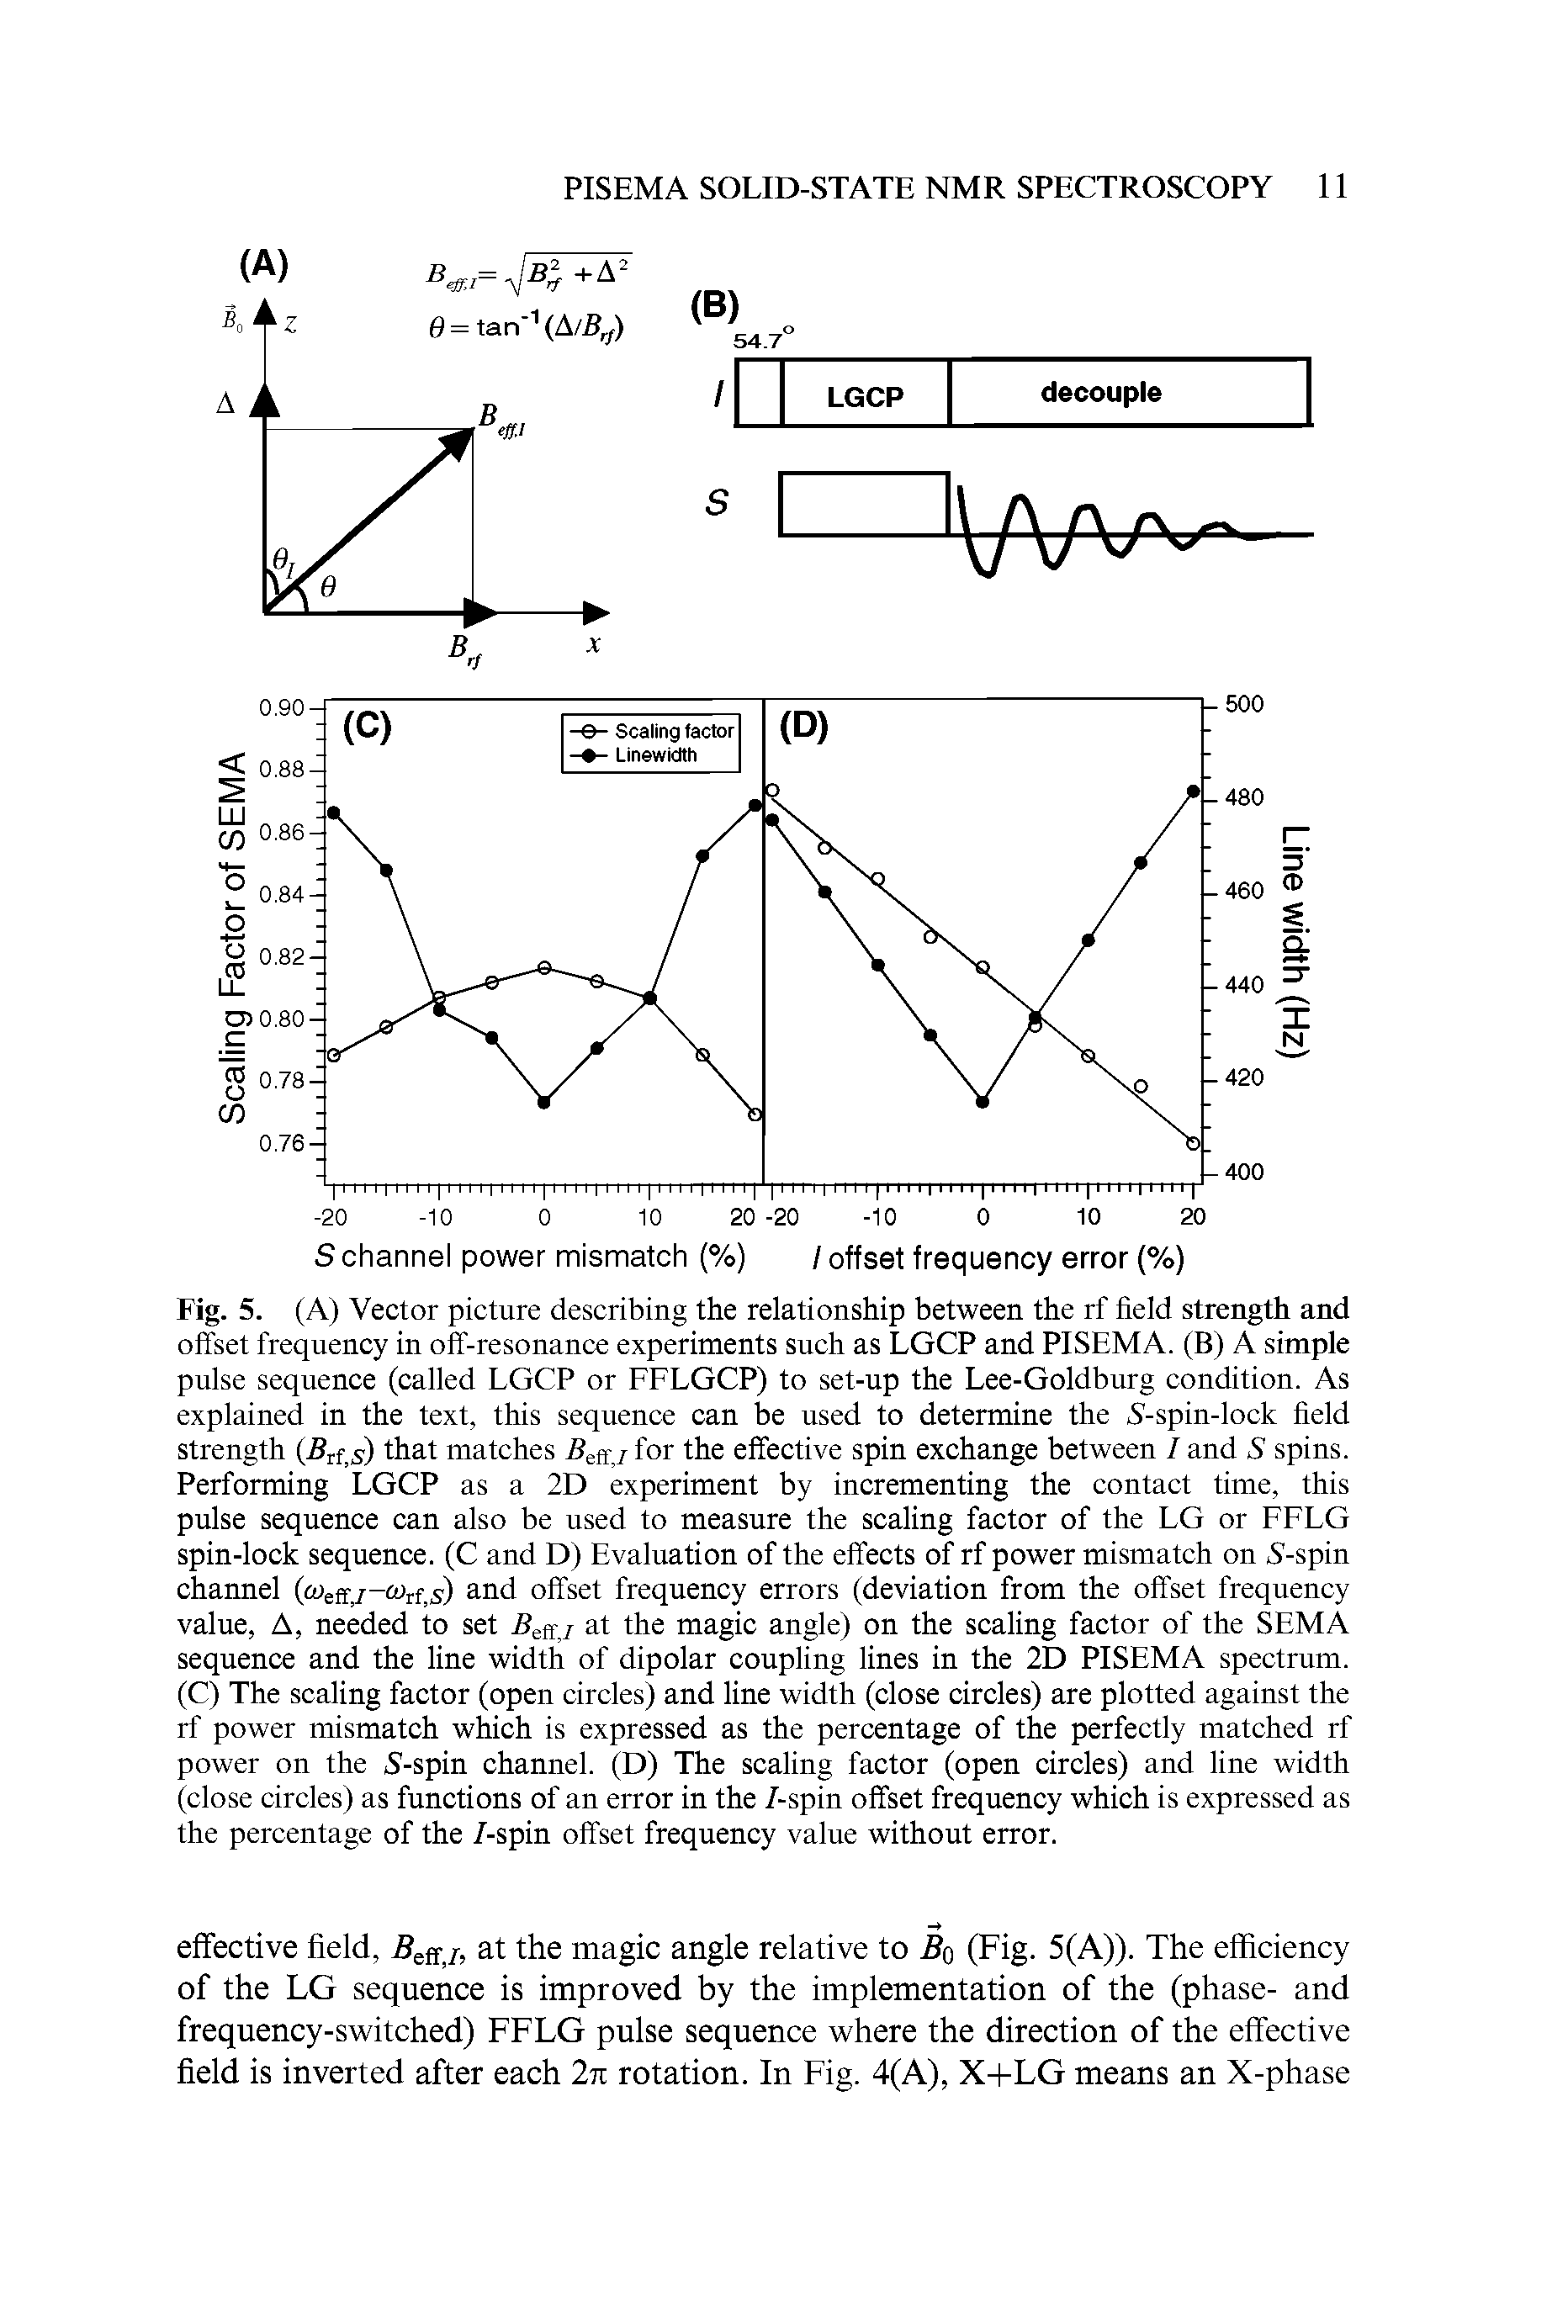 Fig. 5. (A) Vector picture describing the relationship between the rf field strength and offset frequency in off-resonance experiments such as LGCP and PISEMA. (B) A simple pulse sequence (called LGCP or FFLGCP) to set-up the Lee-Goldburg condition. As explained in the text, this sequence can be used to determine the S-spin-lock field strength that matches ileff./for the effective spin exchange between / and S spins.